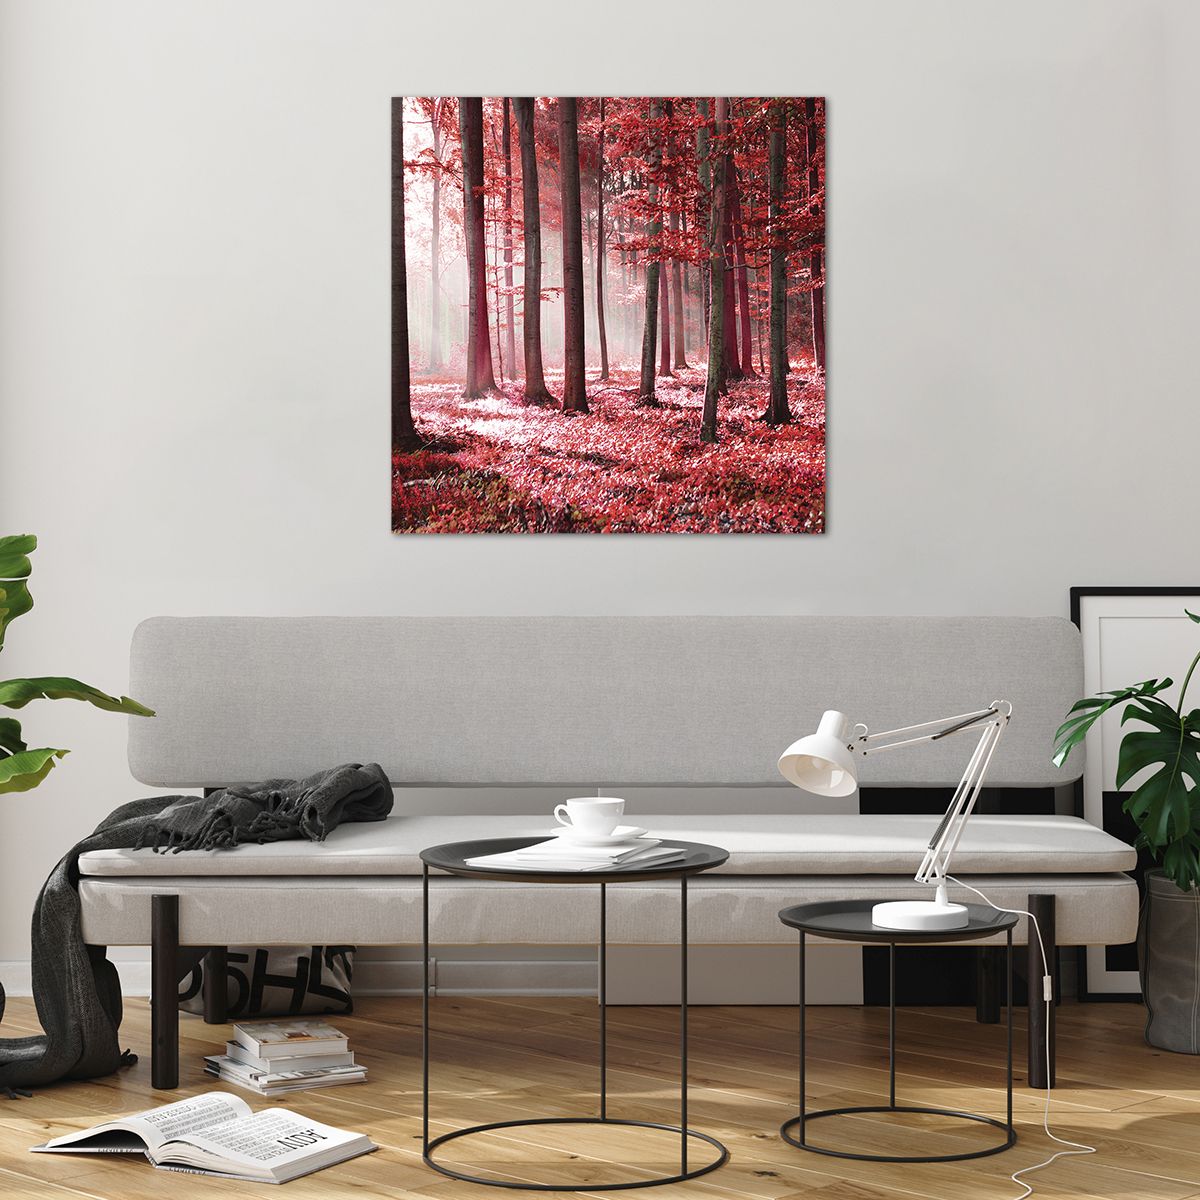 Glass picture  Landscape, Glass picture  Forest, Glass picture  Trees, Glass picture  Nature, Glass picture  Red Leaves